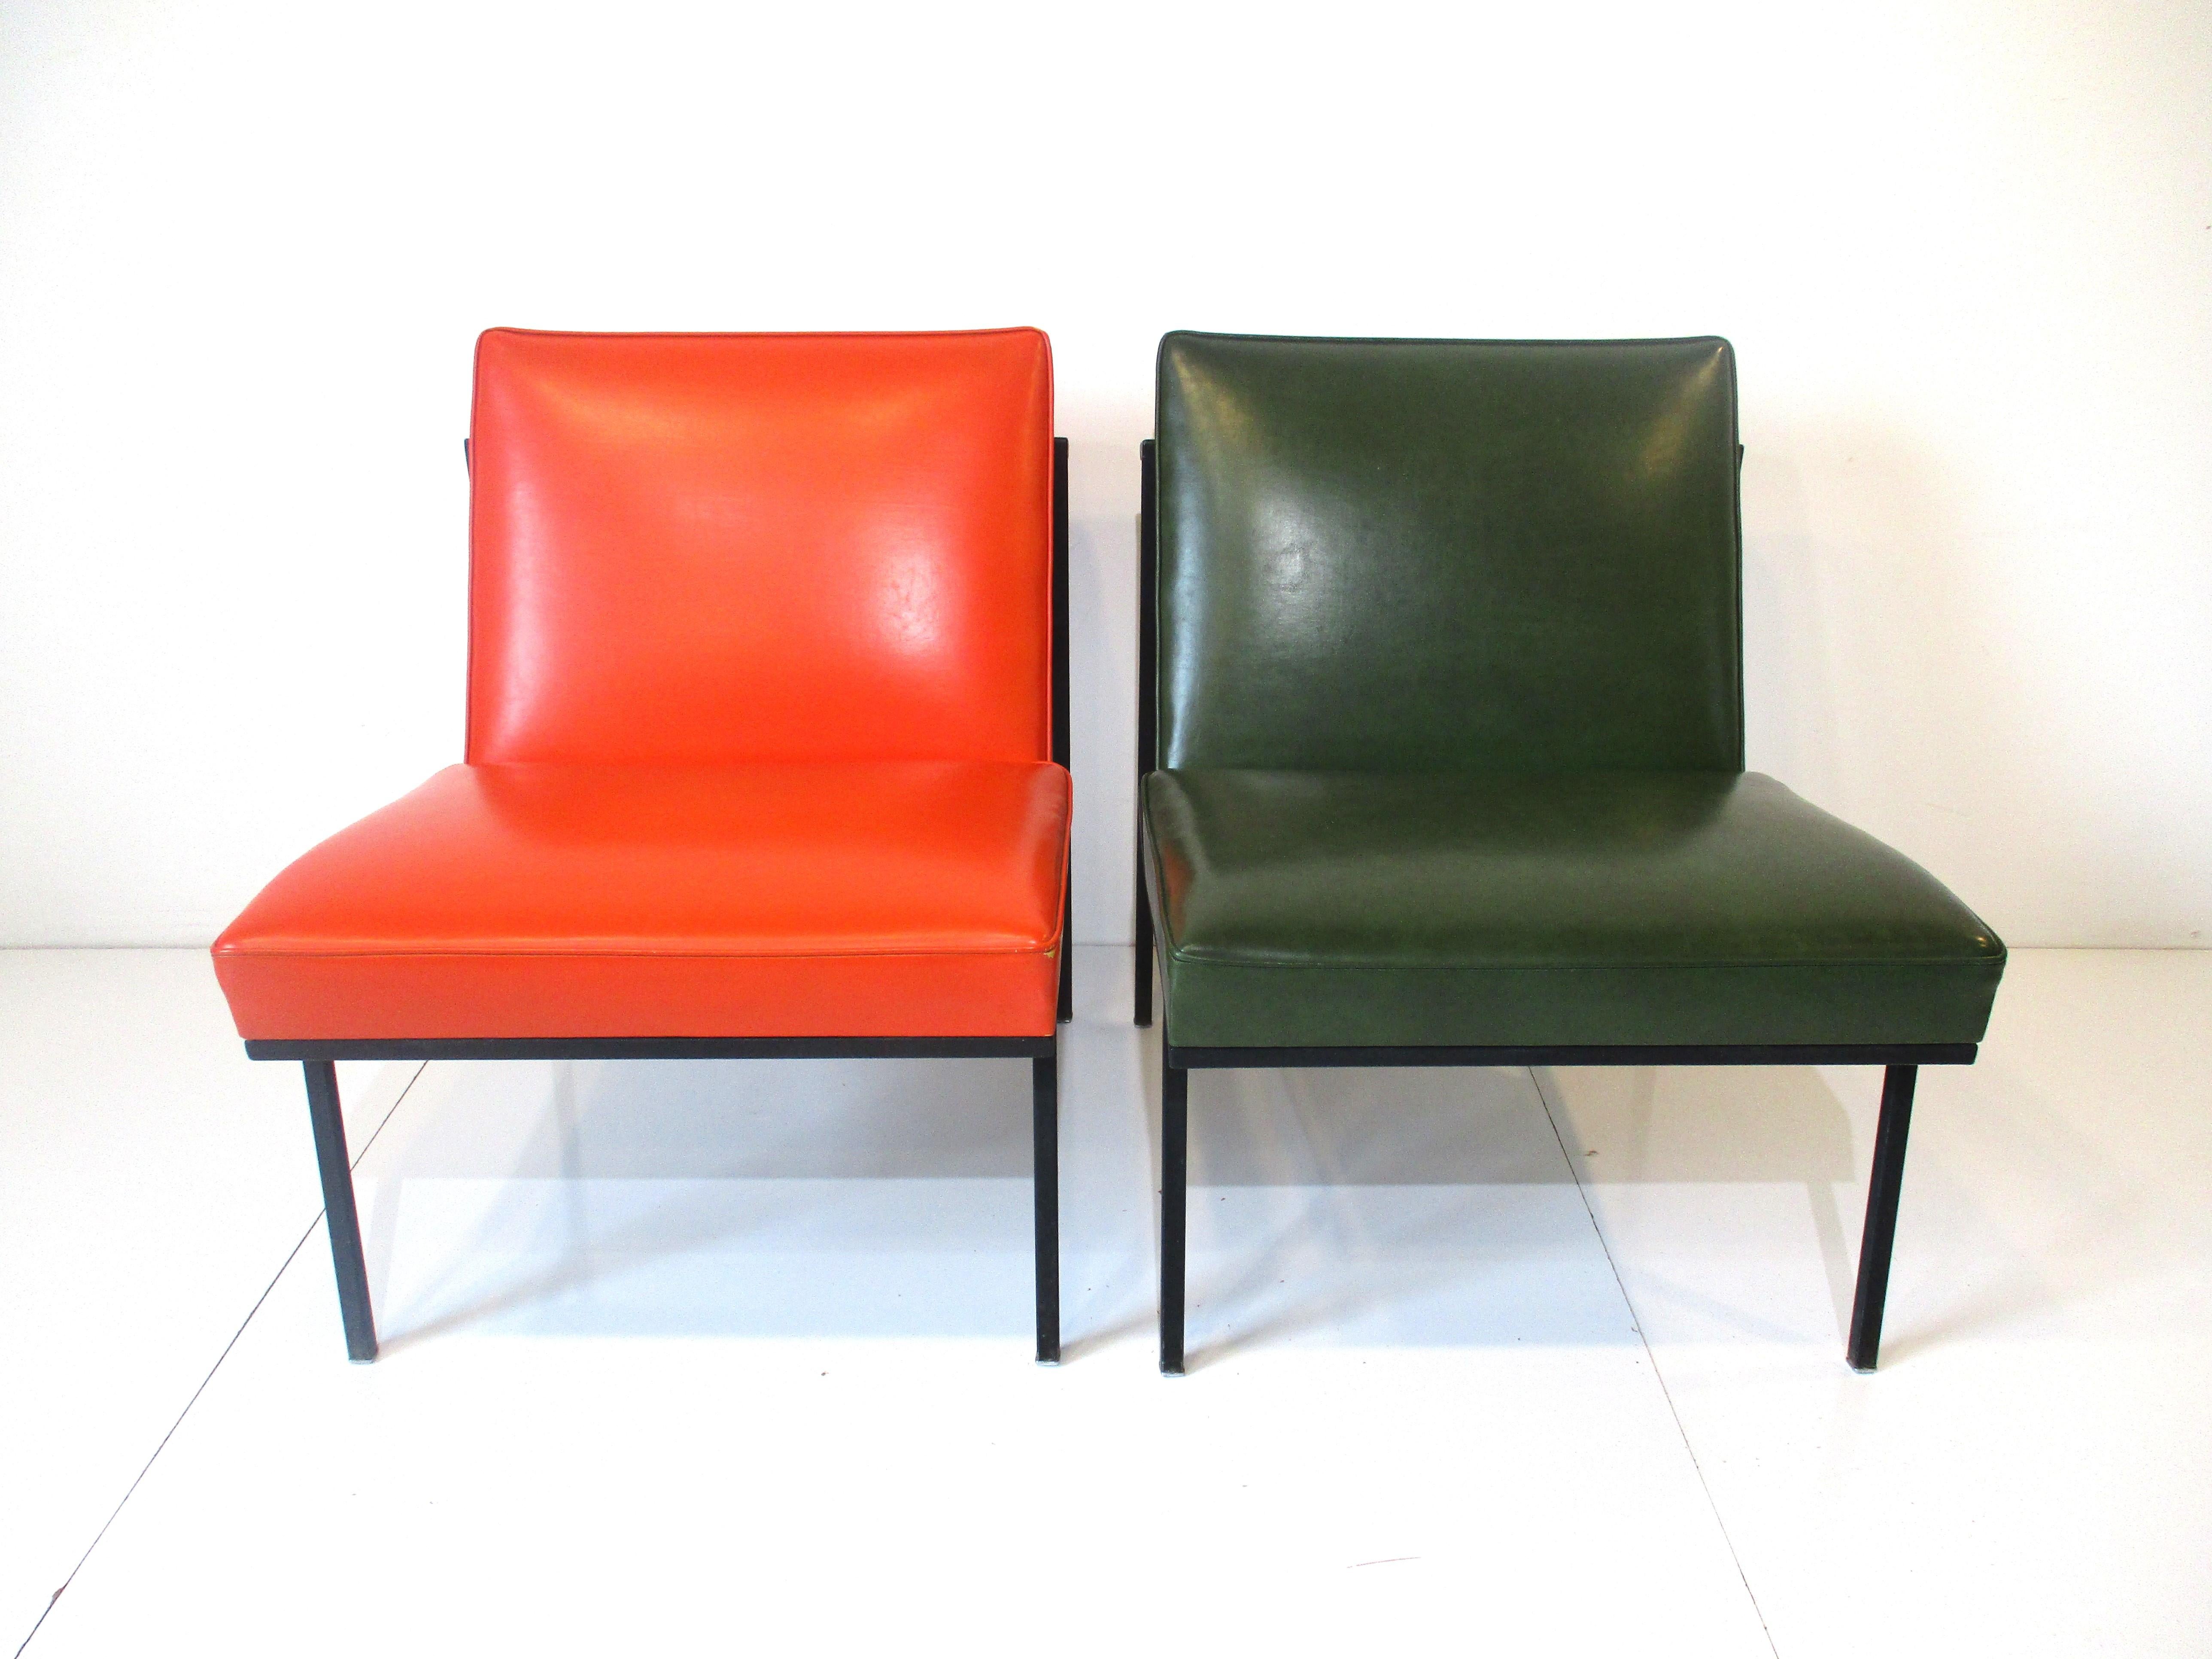 A pair of rare lounge chairs designed by William Armbruster with satin black welded steel frames , chrome leg tips and Naugahyde upholstered cushions . The frames are well designed with canvas back supporting straps with a artistic and architectural